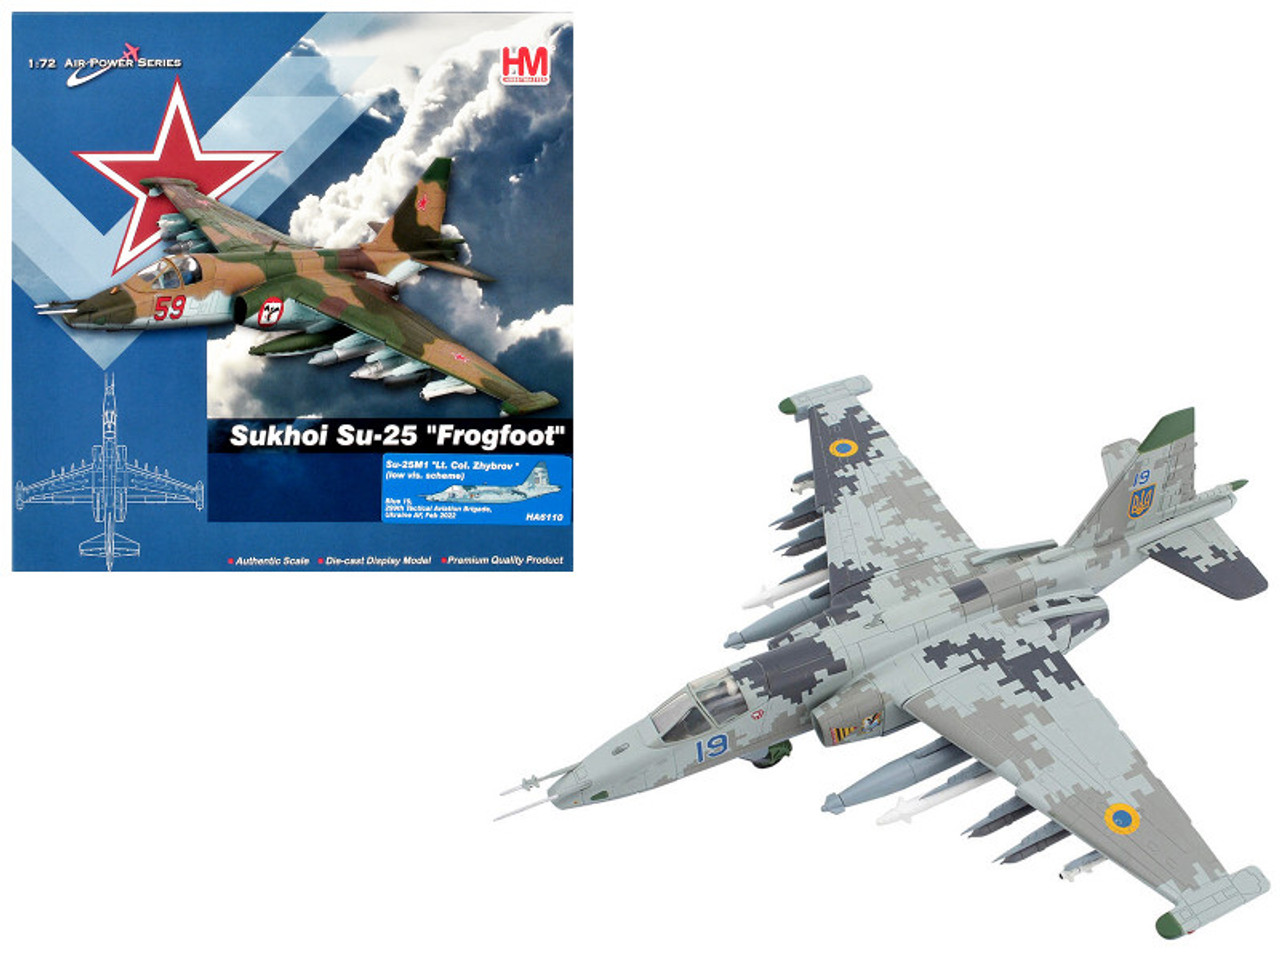 Sukhoi Su-25M1 Frogfoot Aircraft "Lieutenant Colonel Zhybrov 299th Tactical Aviation Brigade" (2022) Ukrainian Air Force "Air Power Series" 1/72 Diecast Model by Hobby Master